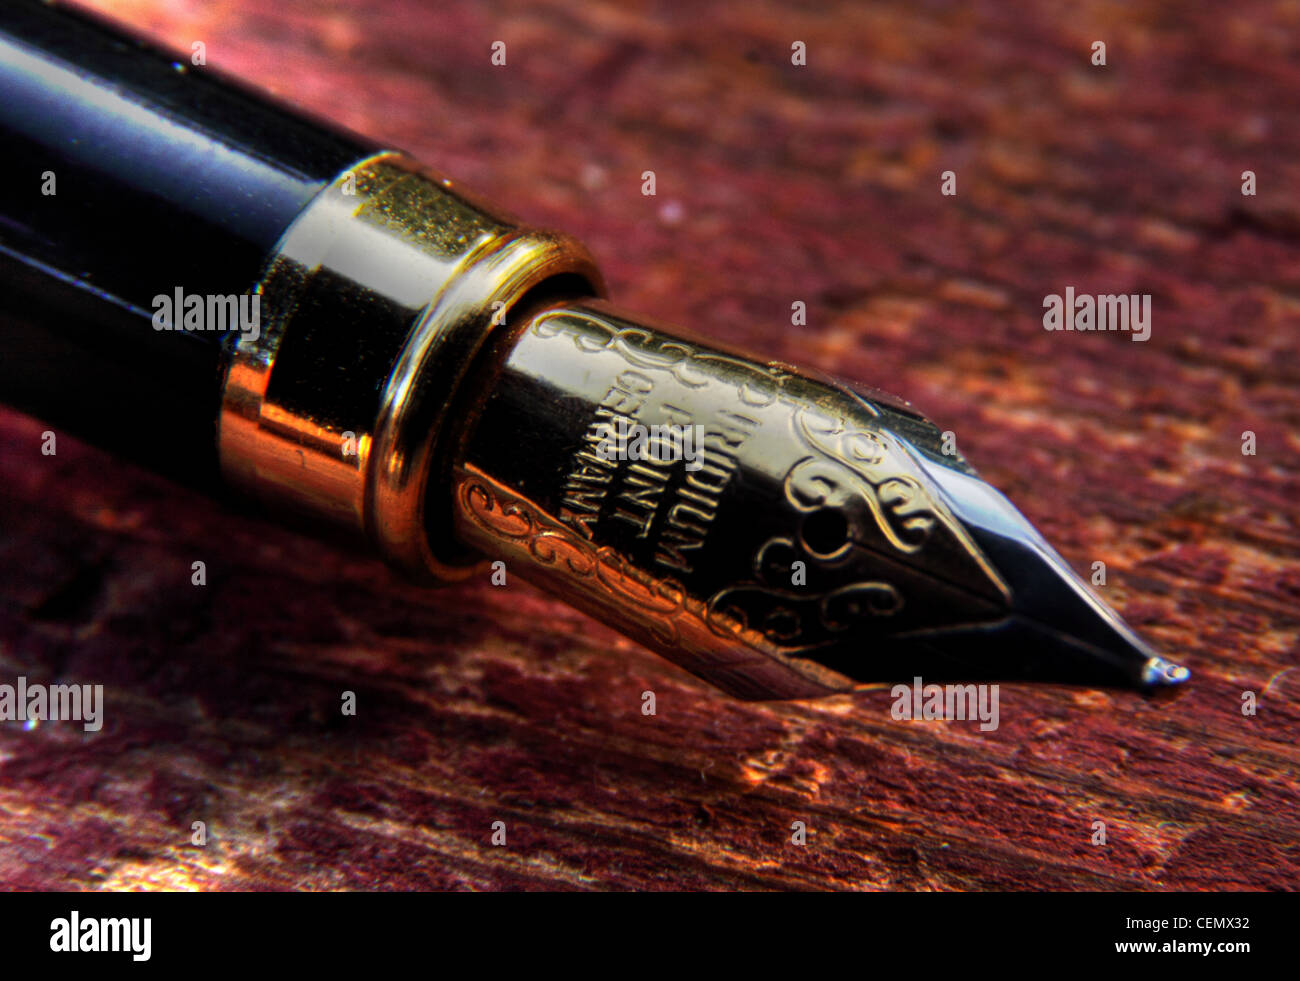 Old fashioned letter writing - Fountain pen nib on wood, macro close up using a microscope Stock Photo